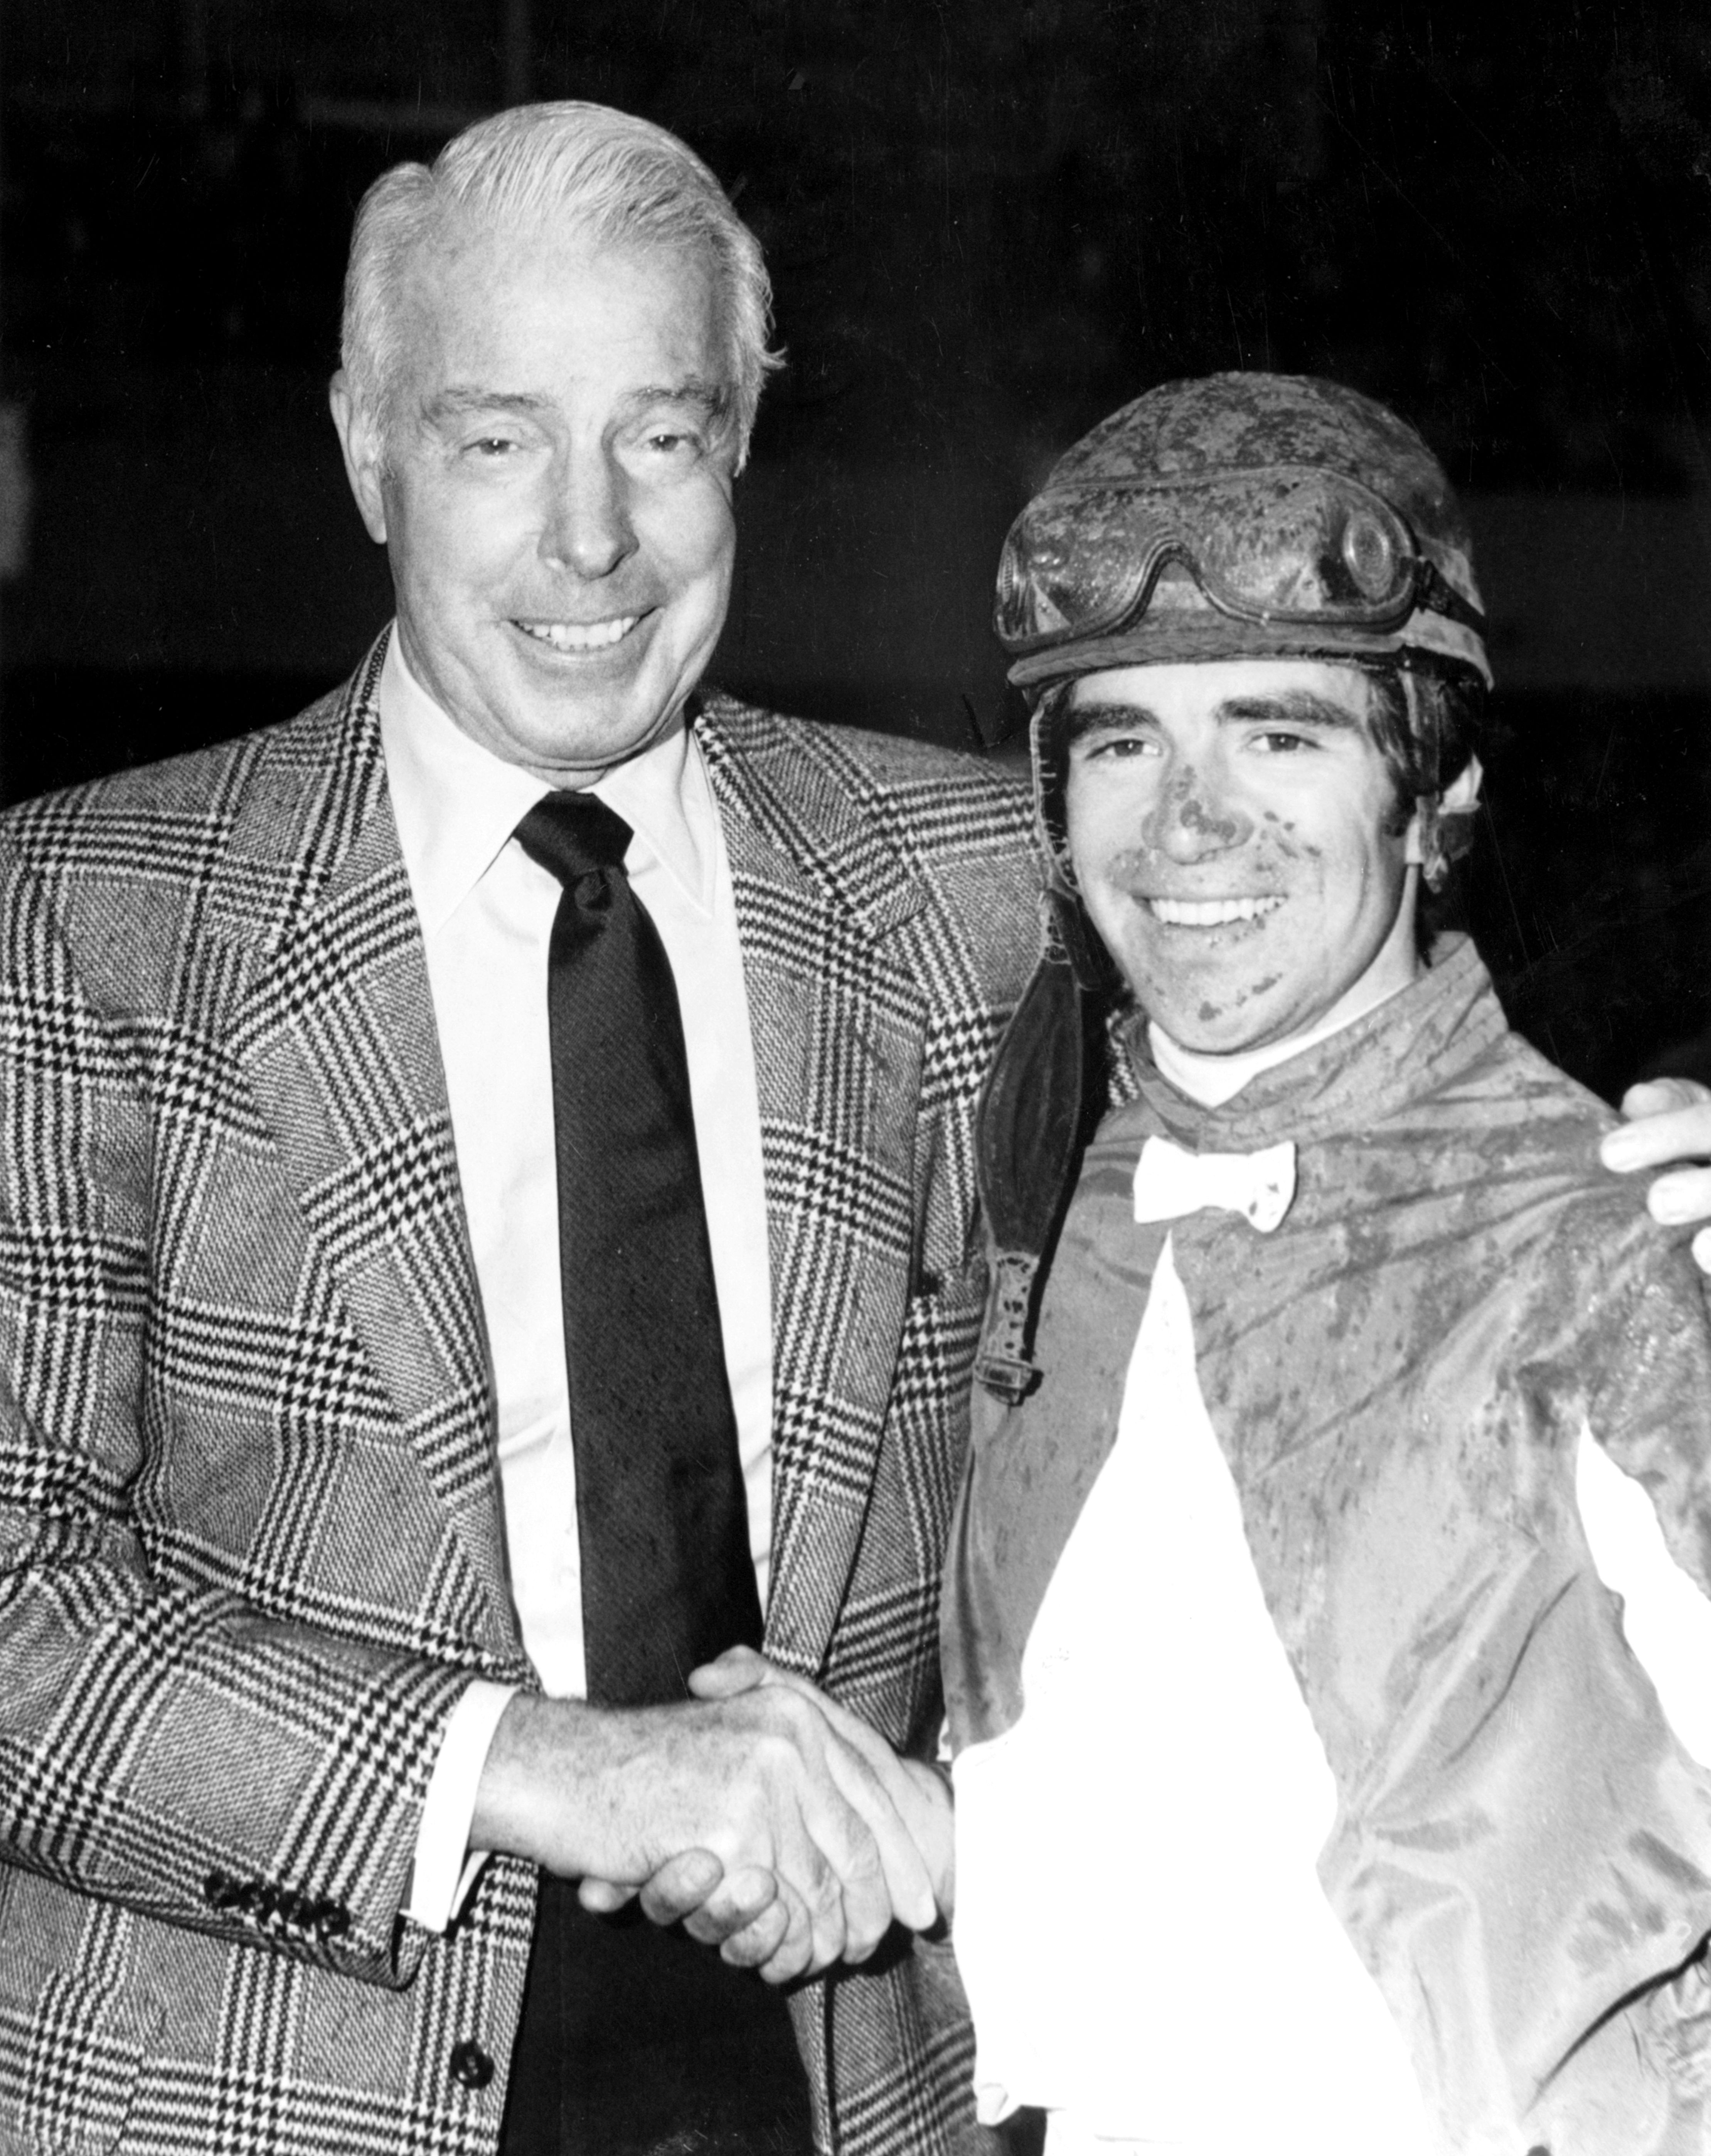 Darrel McHargue with Joe DiMaggio (Keeneland Library Thoroughbred Times Collection)